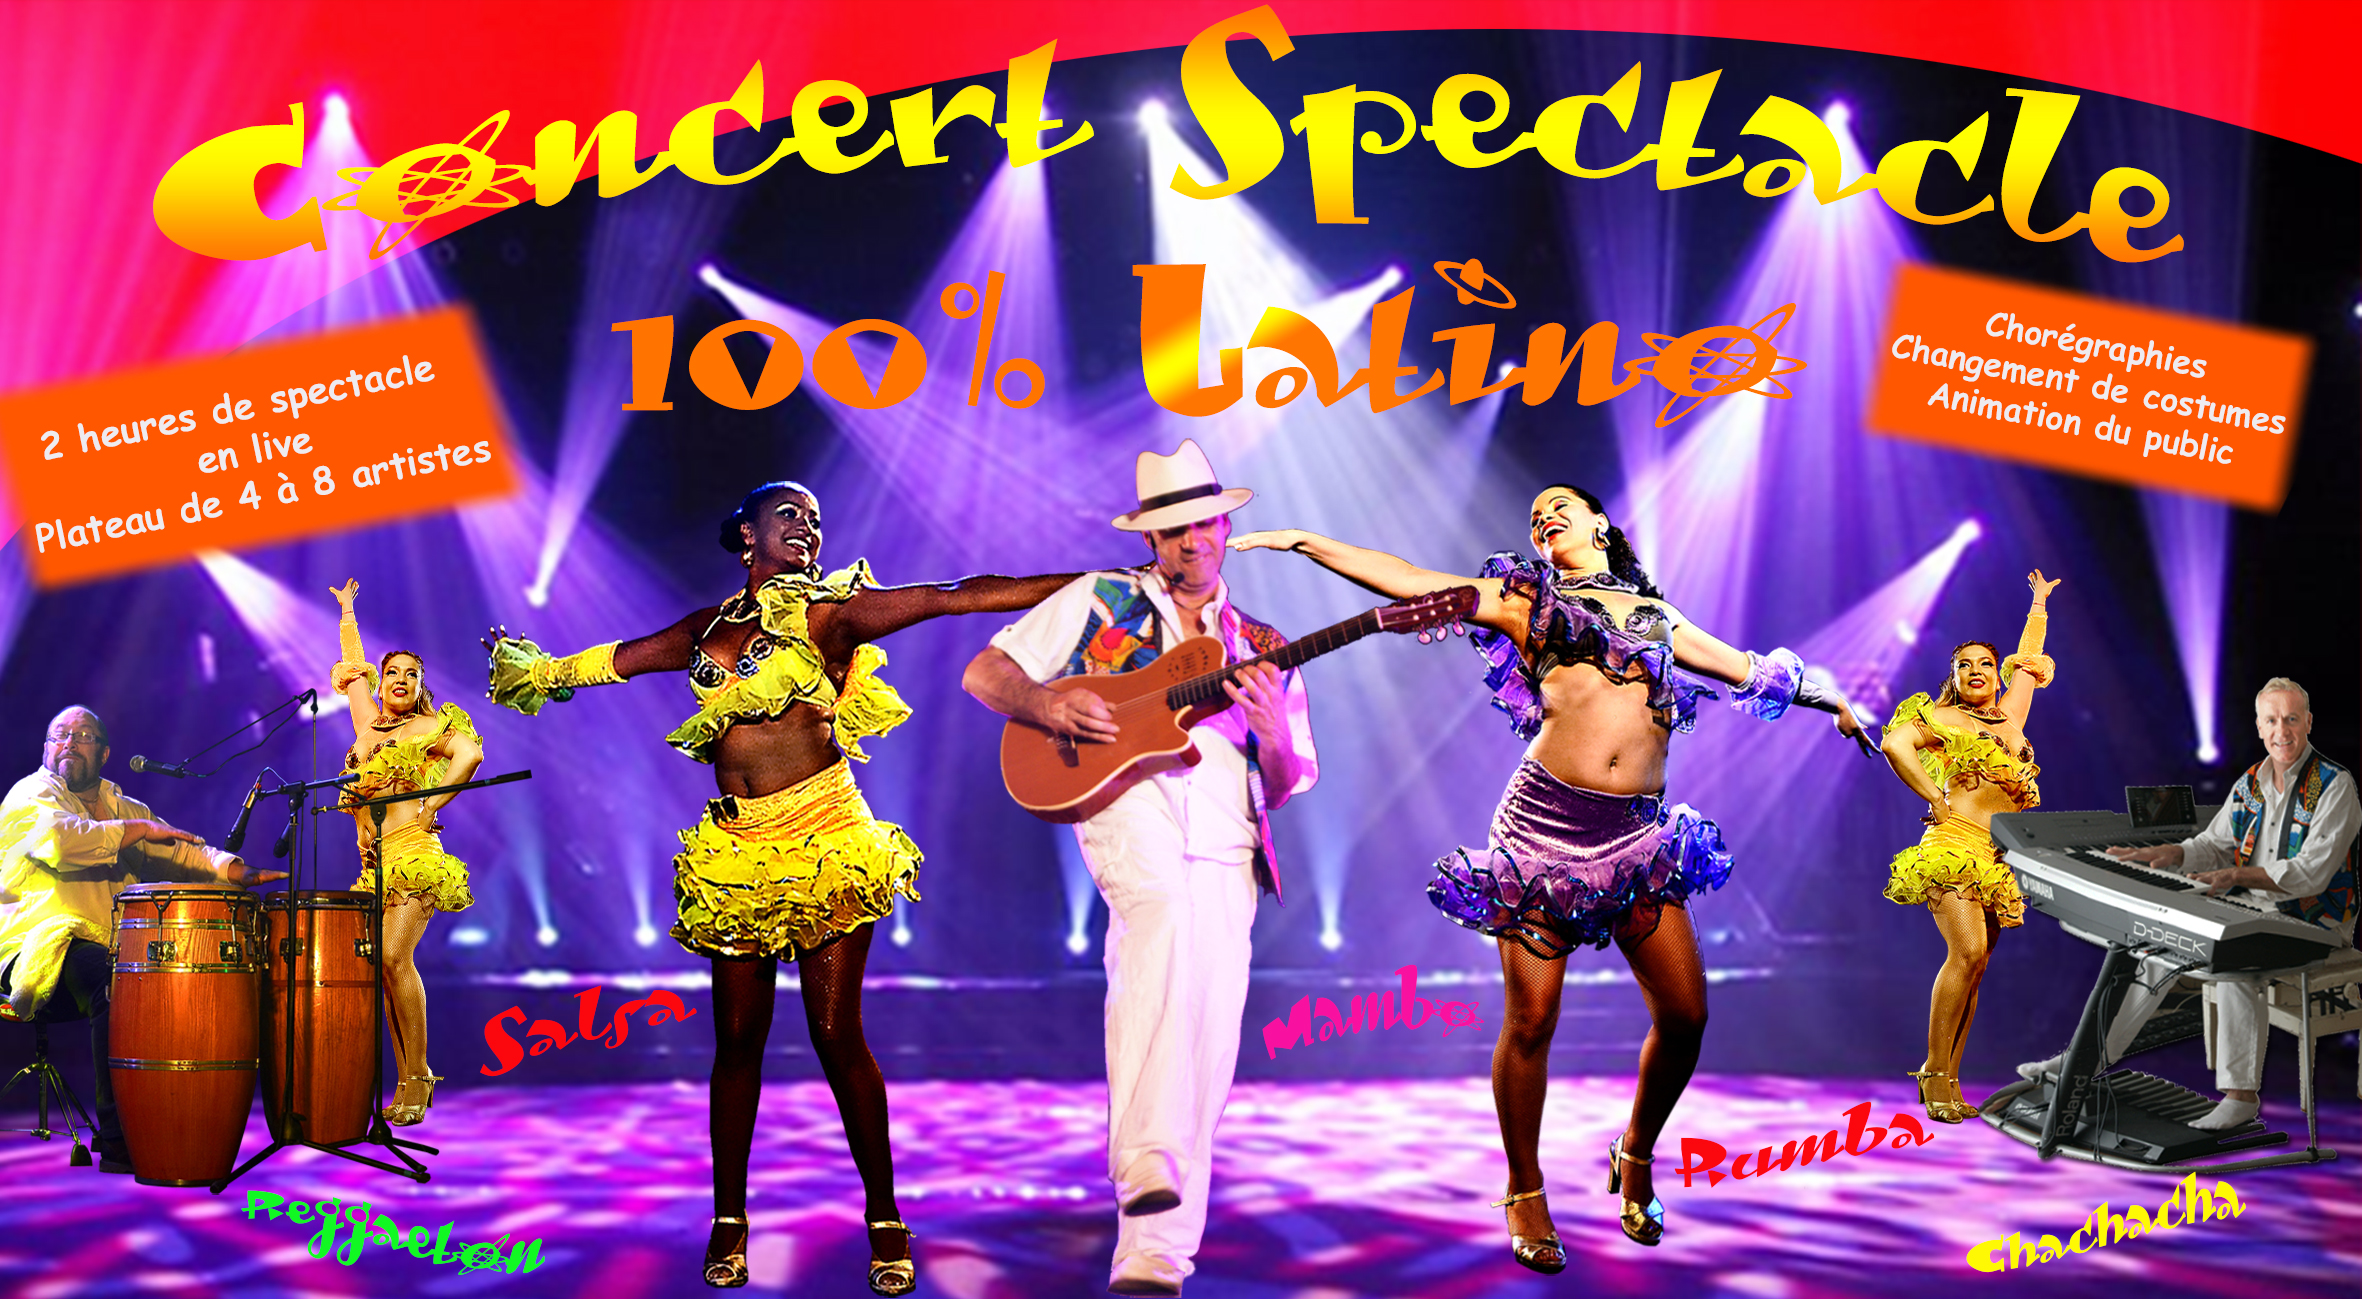 SPECTACLE REVUE 100% LATINO